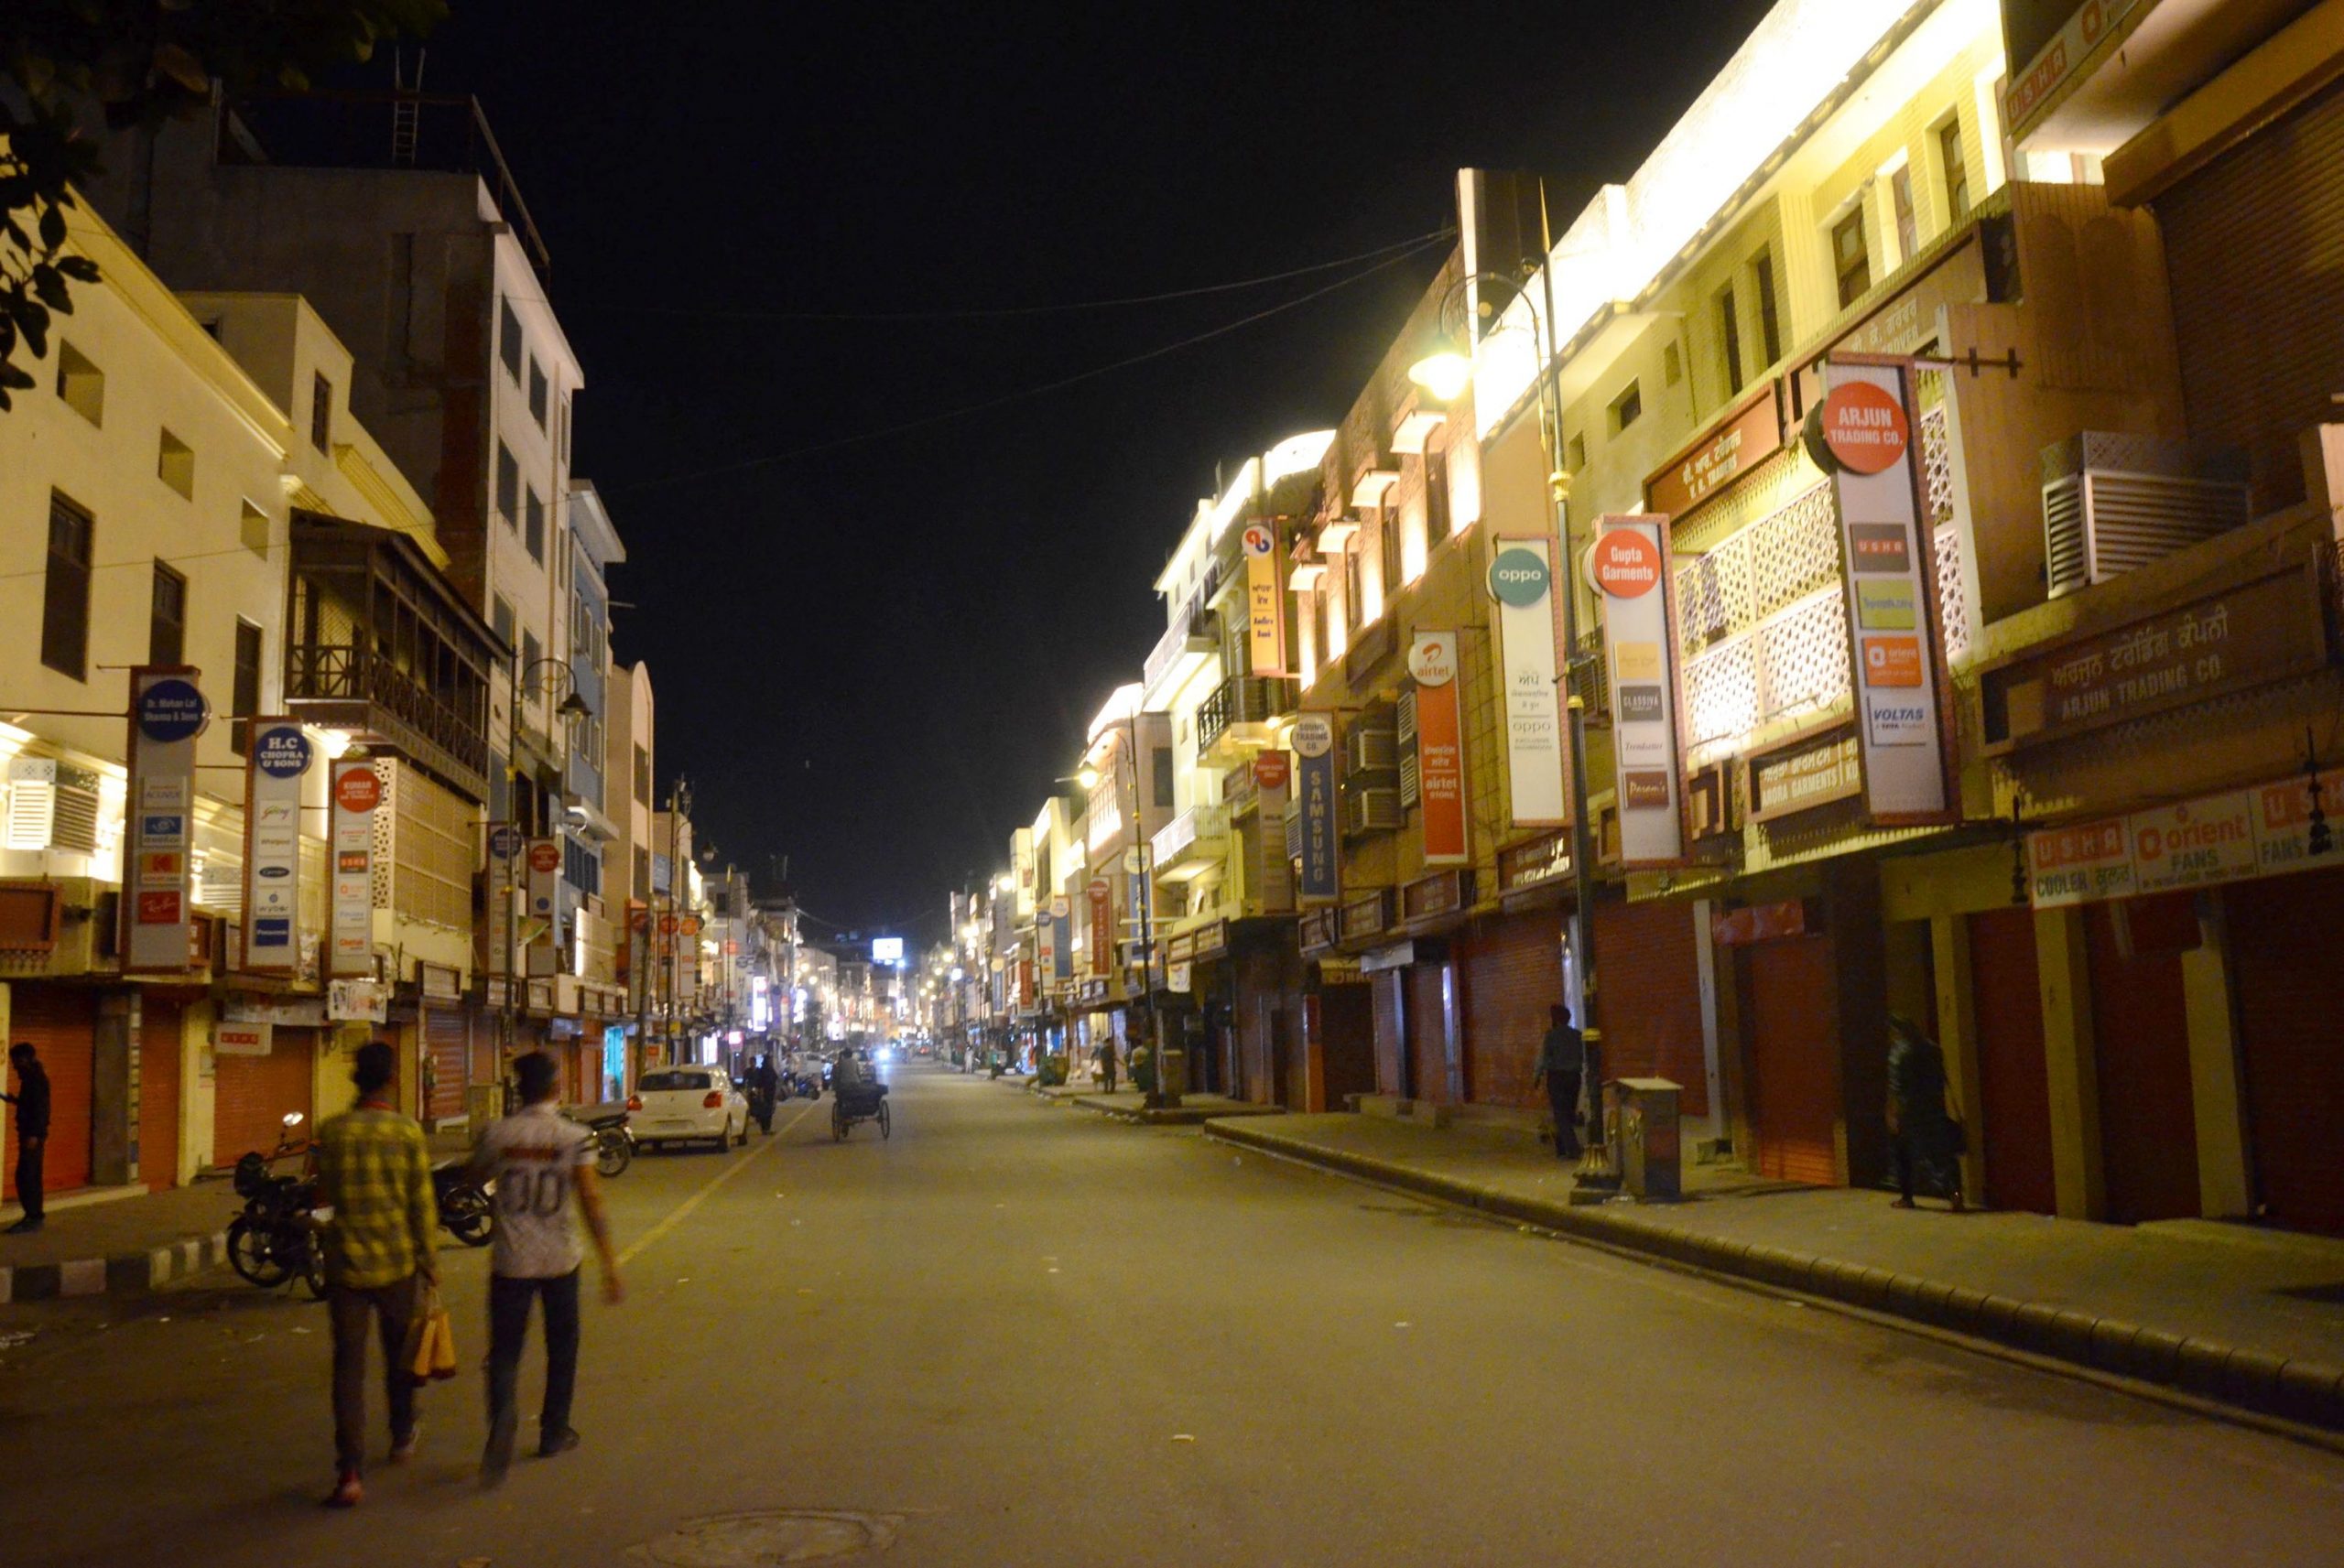 UP imposes night curfew in several cities amid surge in COVID-19 cases